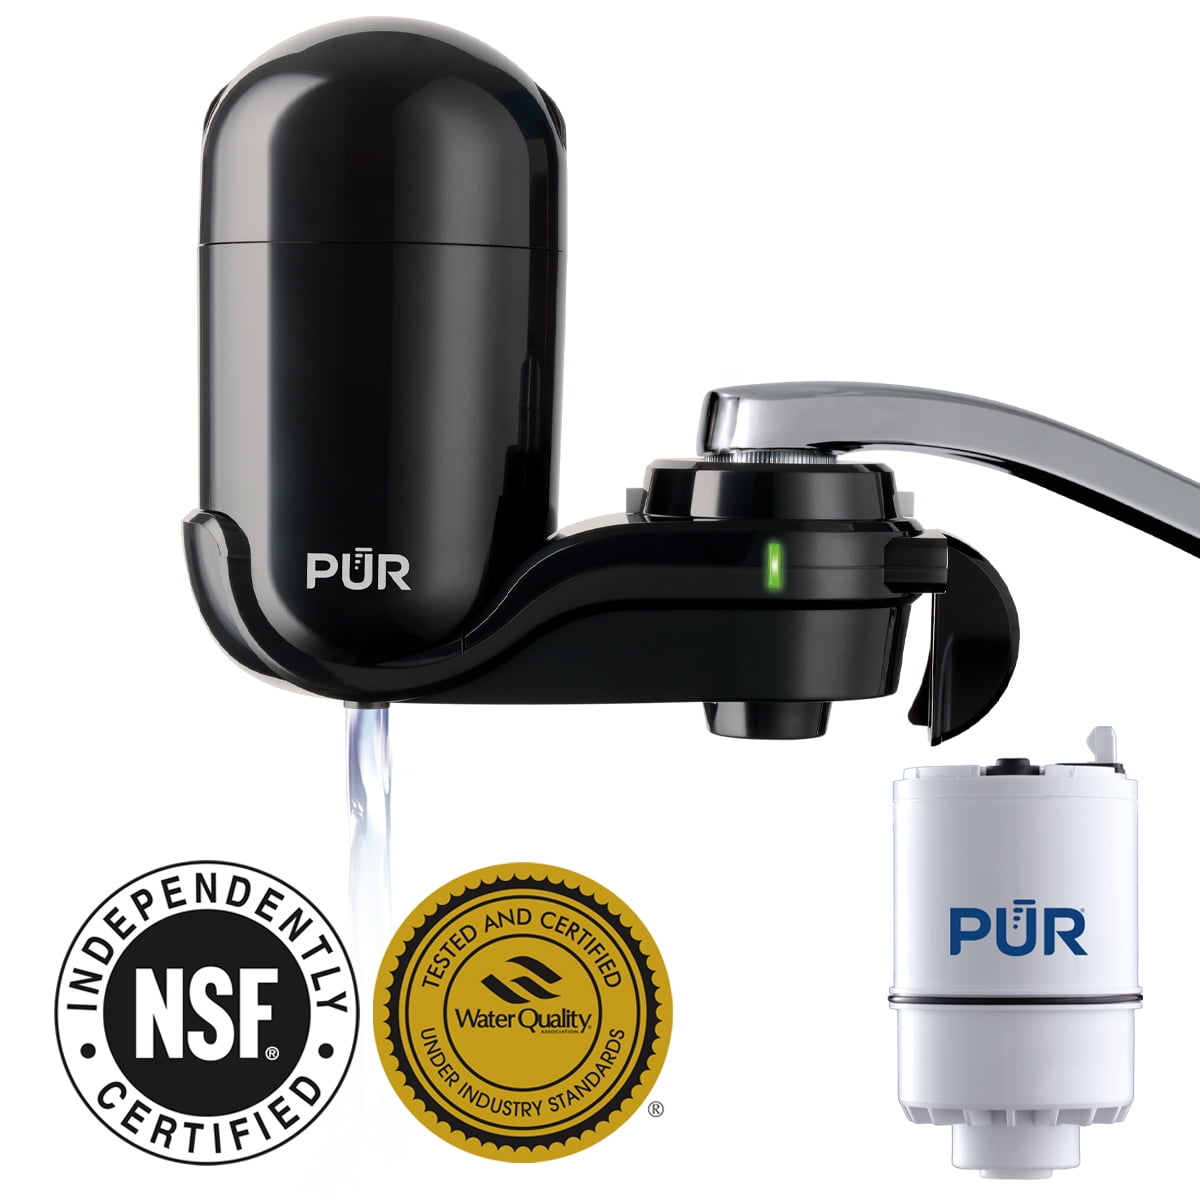 pur water filter replacement